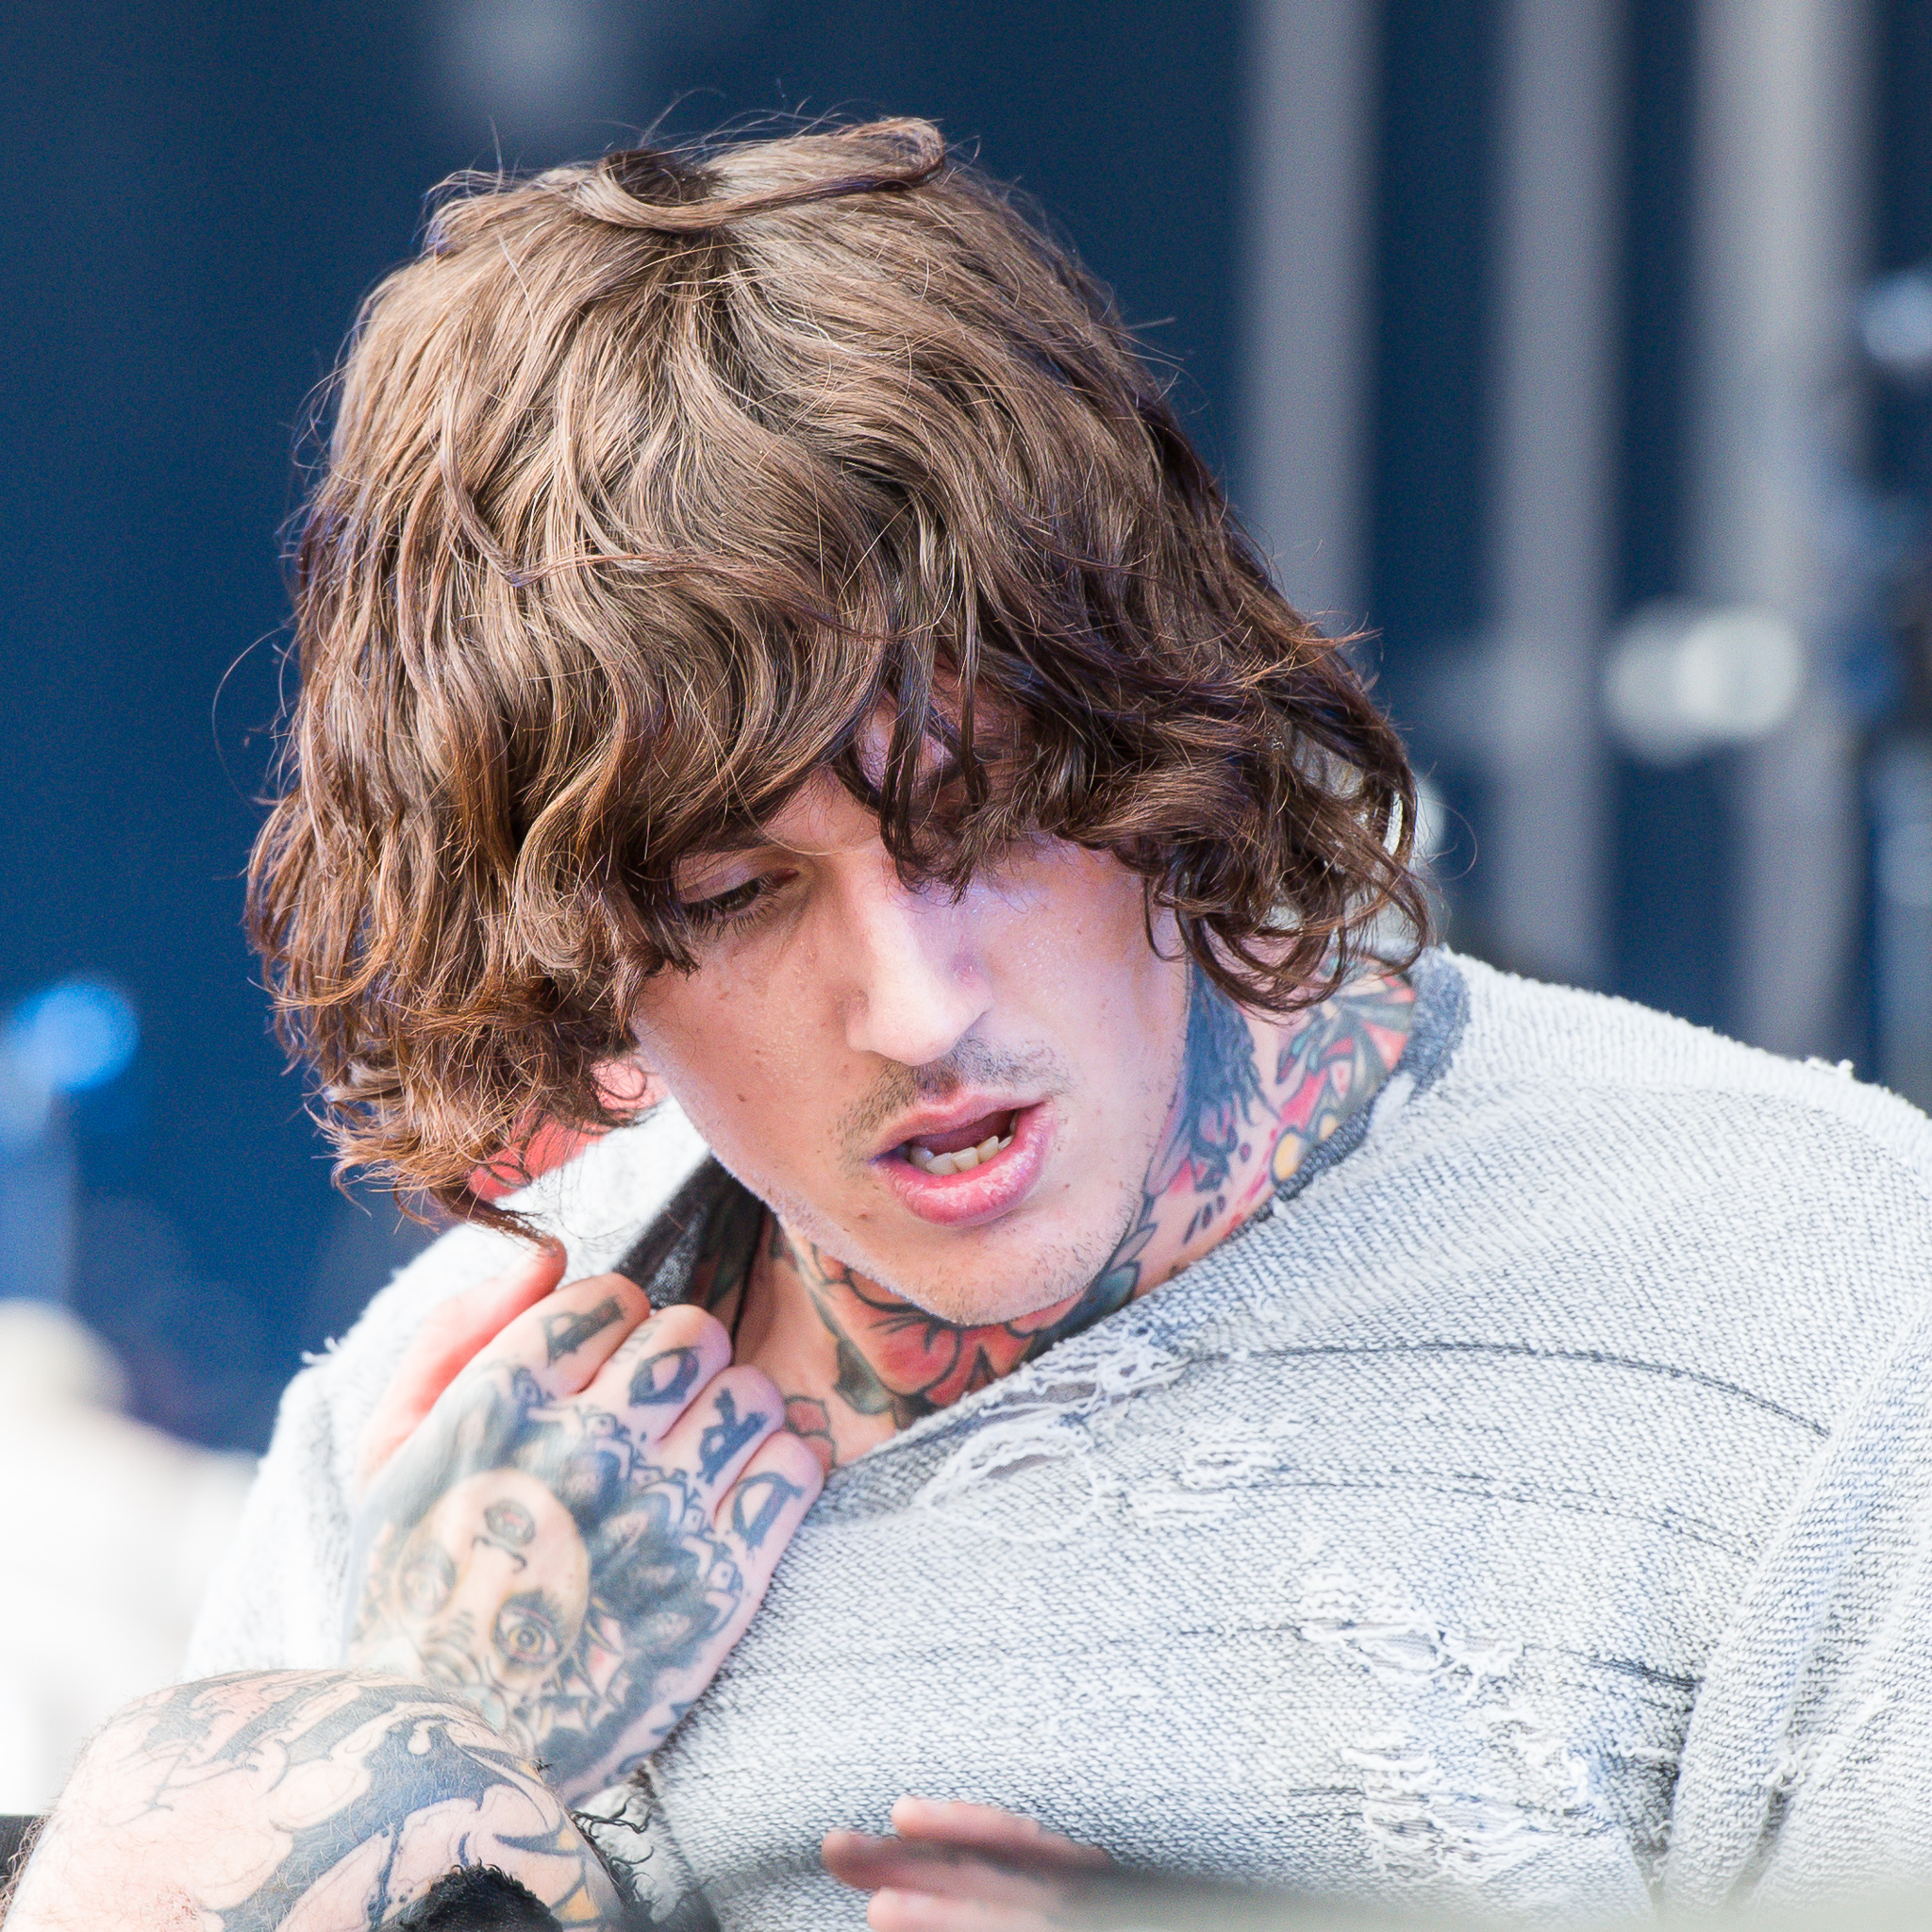 Oliver Sykes Down Low, Oliver Sykes of Bring Me The Horizon…